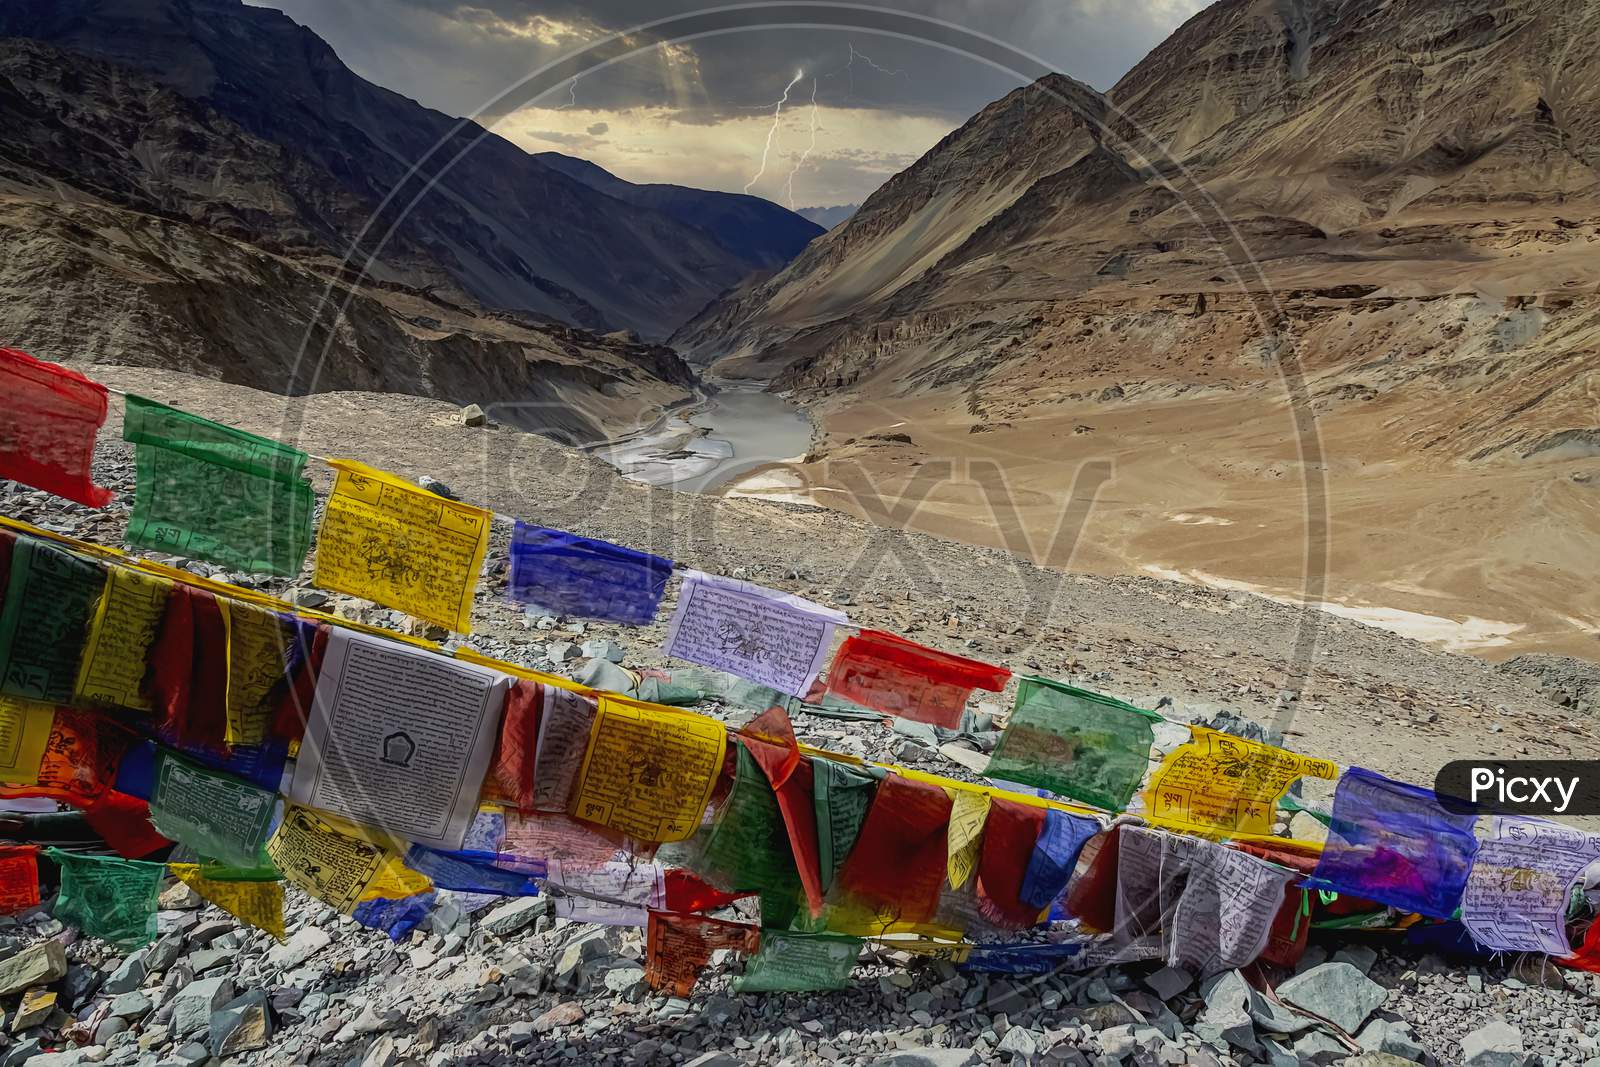 Colourful traditional prayer flags with woodblock-printed text and images brighten up the Himalayan country side in Leh, India .